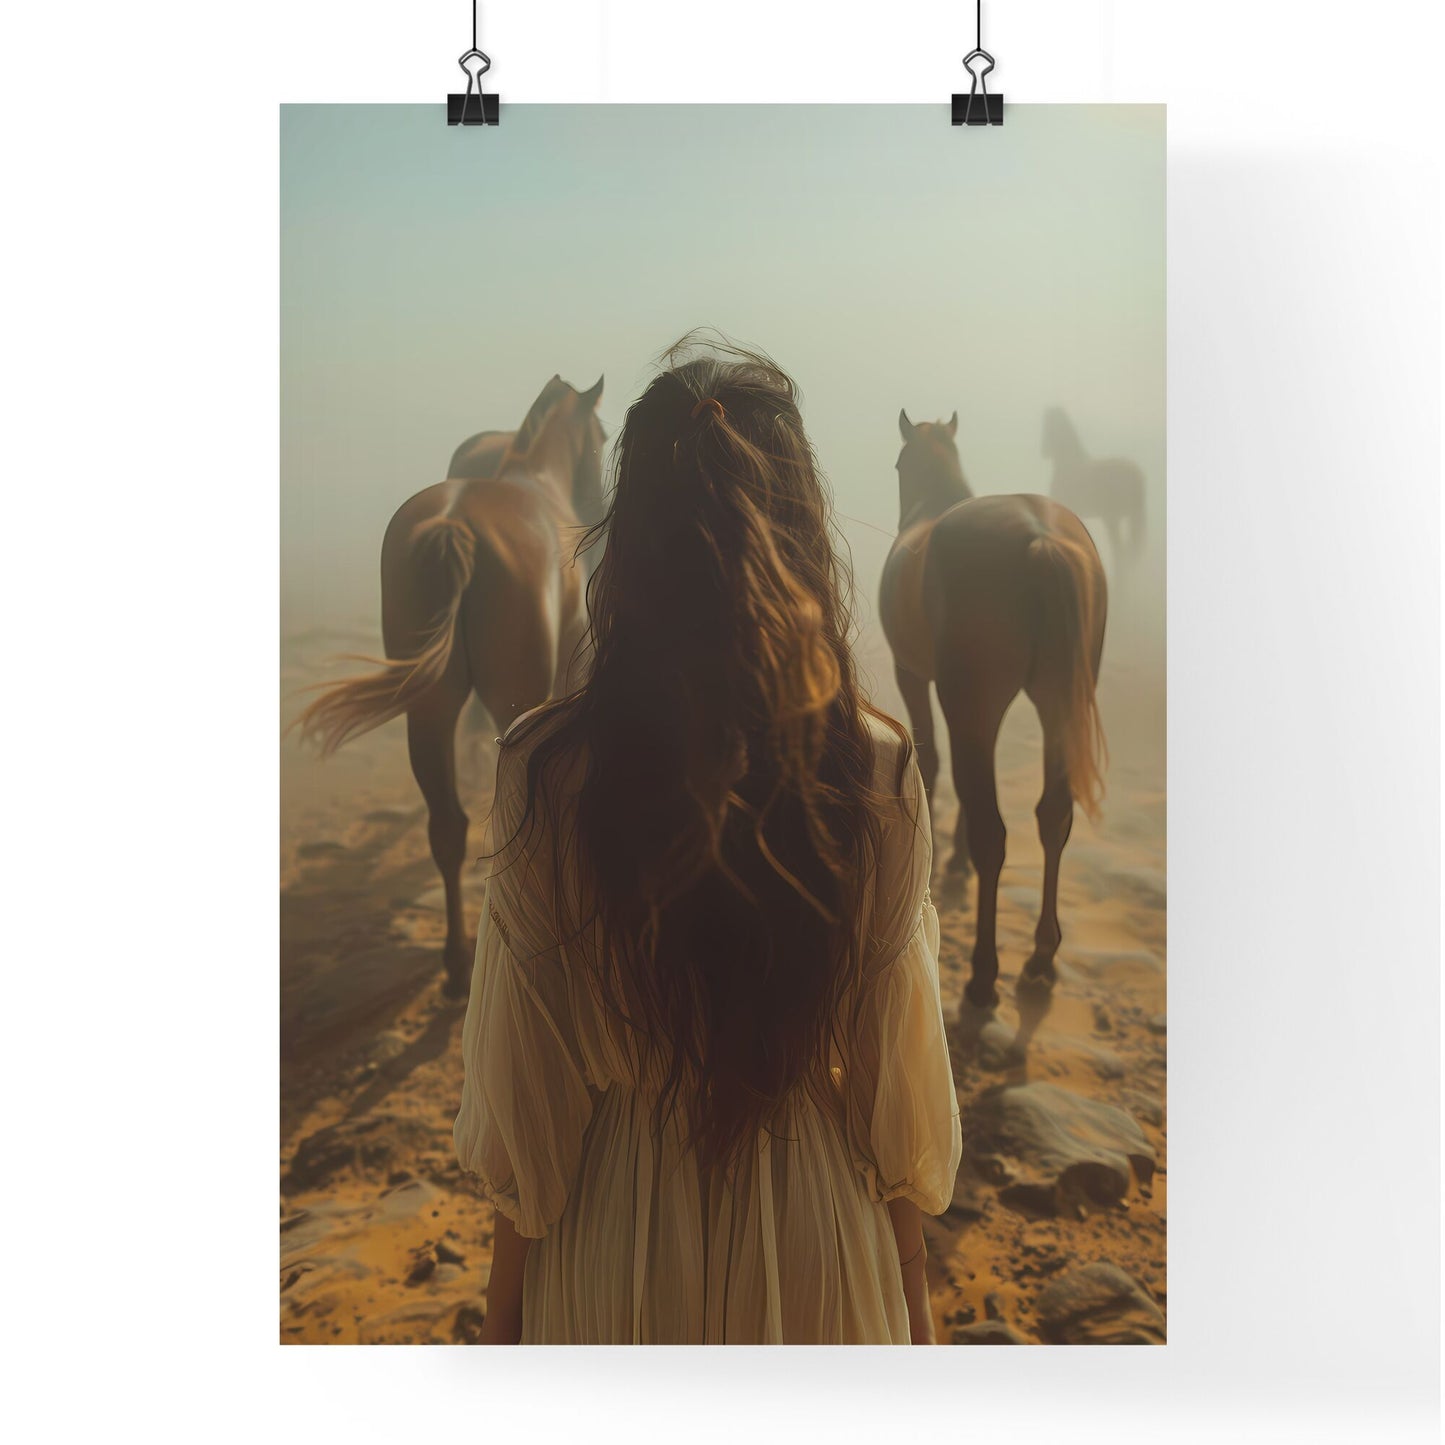 Artful Cinematic Portrait of a Young Equestrian Girl Amidst Steeds in a Misty Desert Landscape Default Title